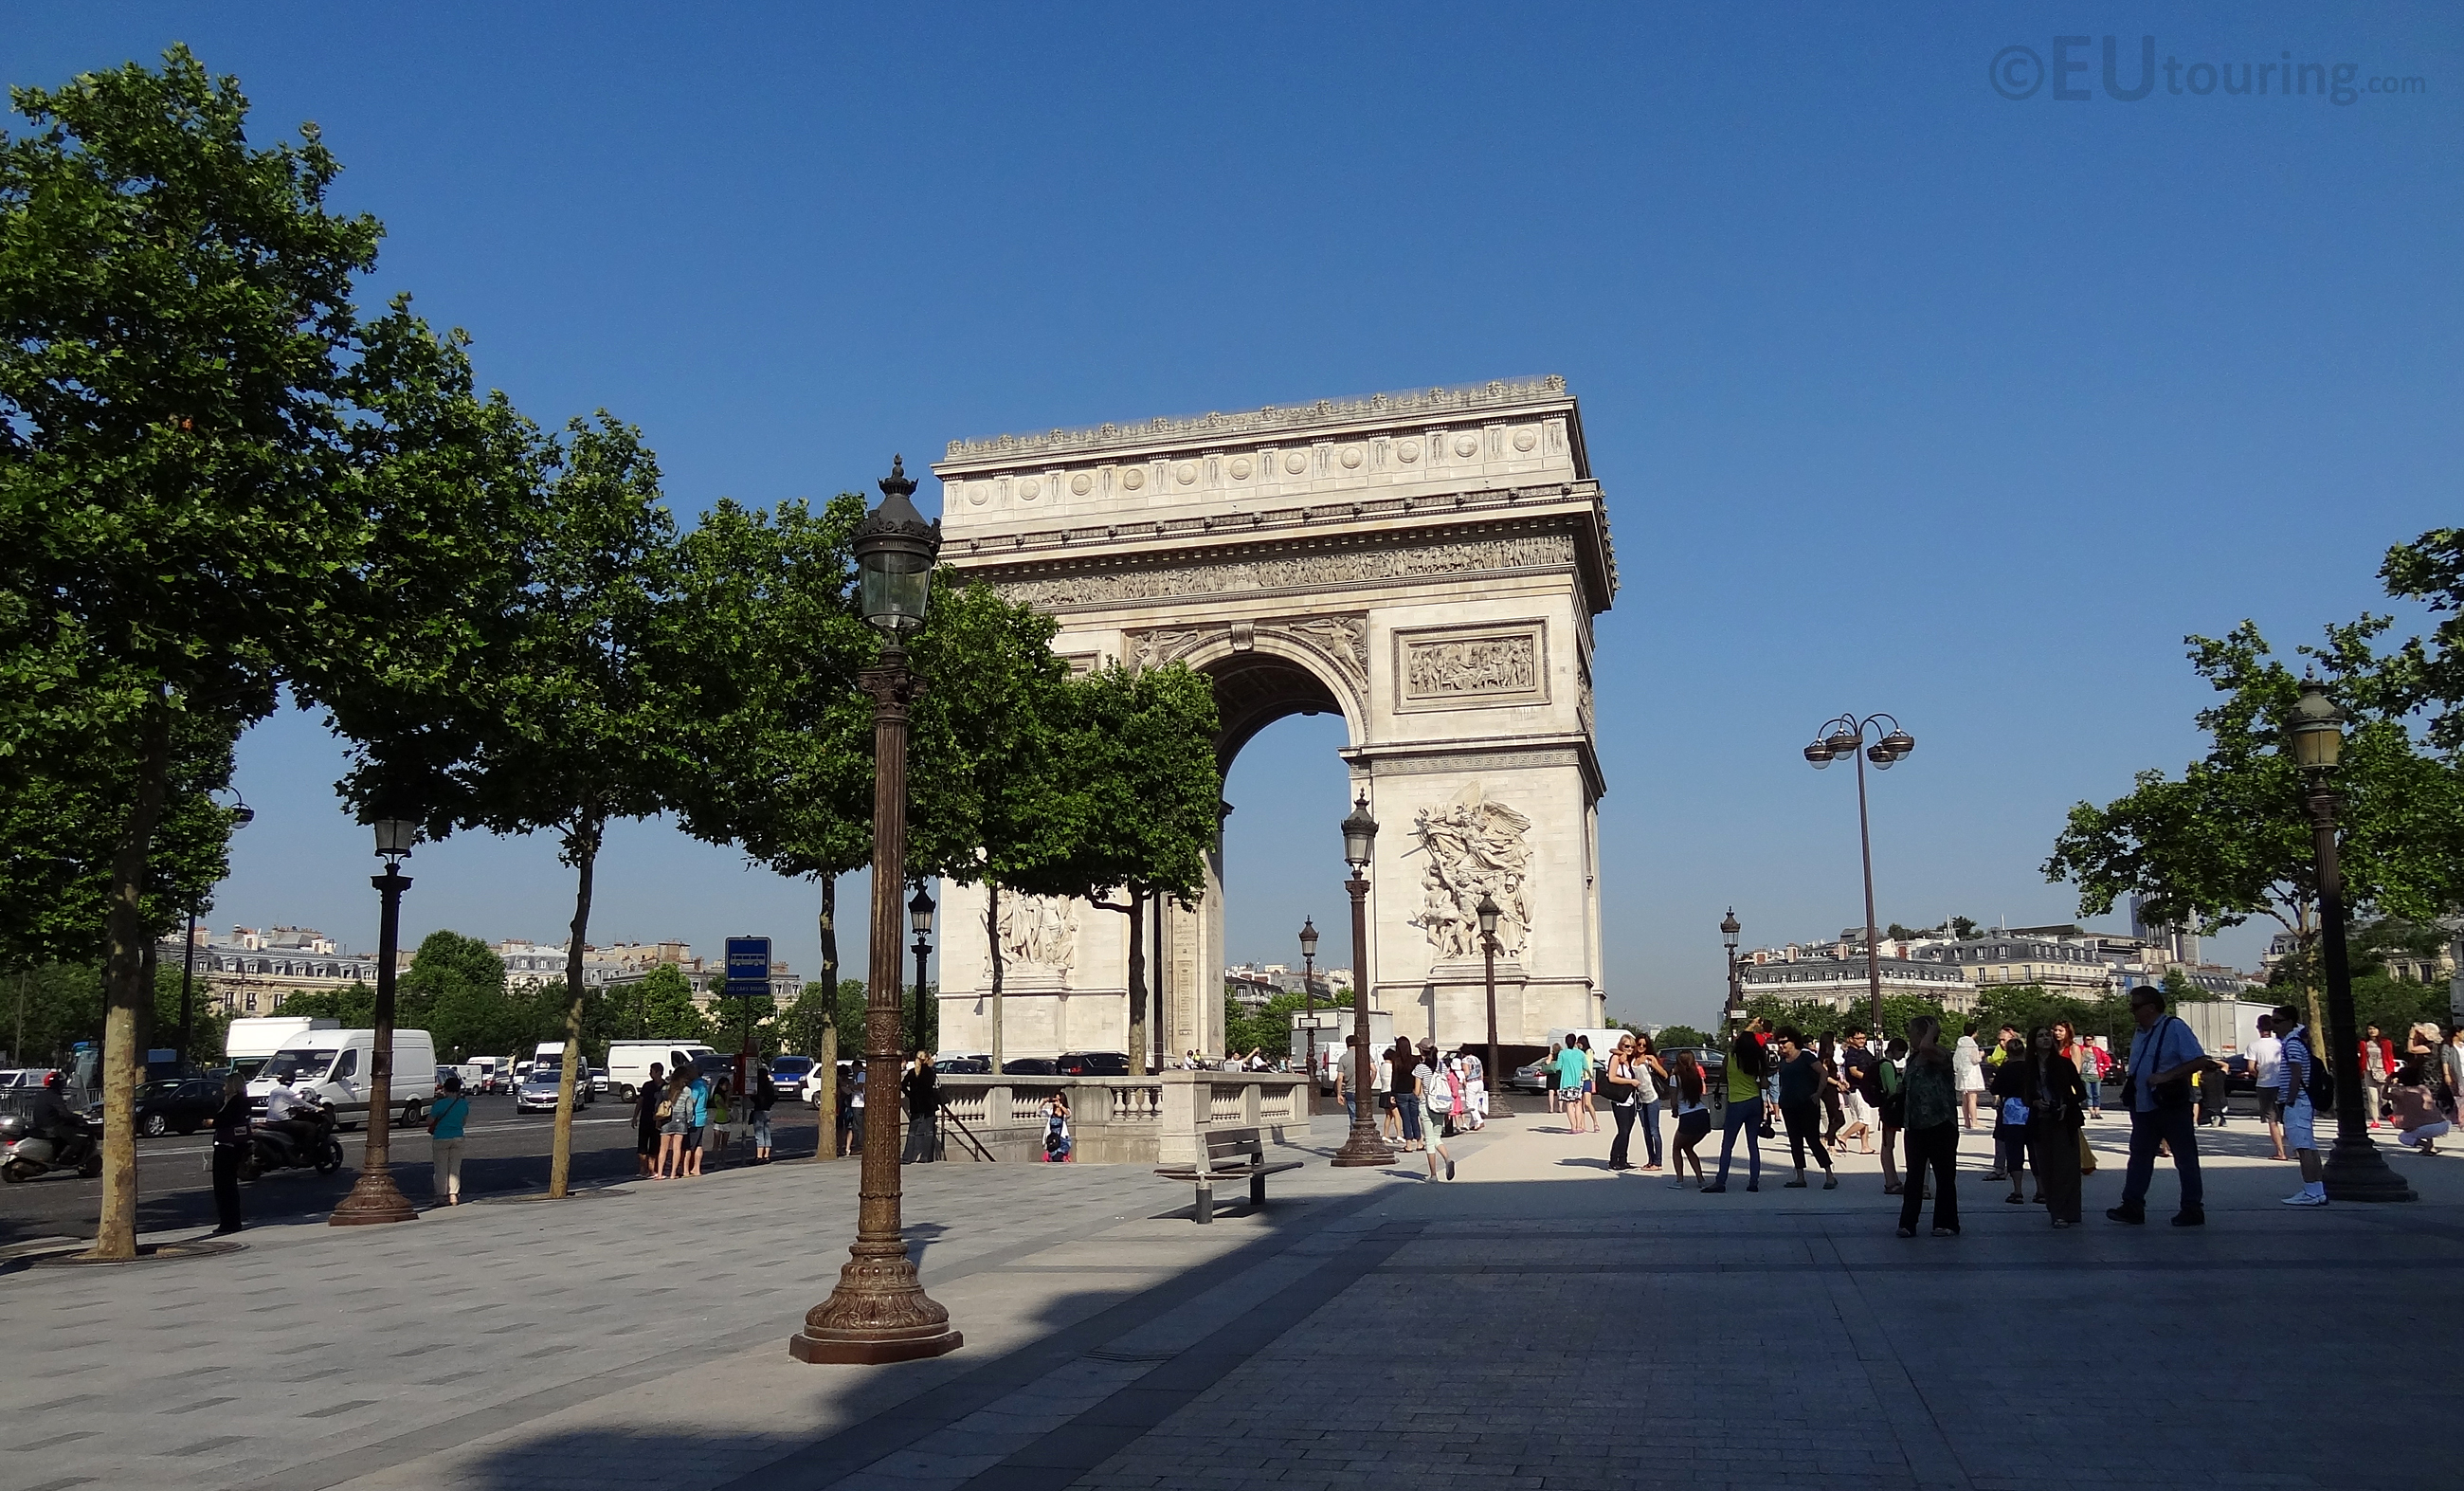 The end of the Champs Elysees at the Arc de Triomphe – EUtouring